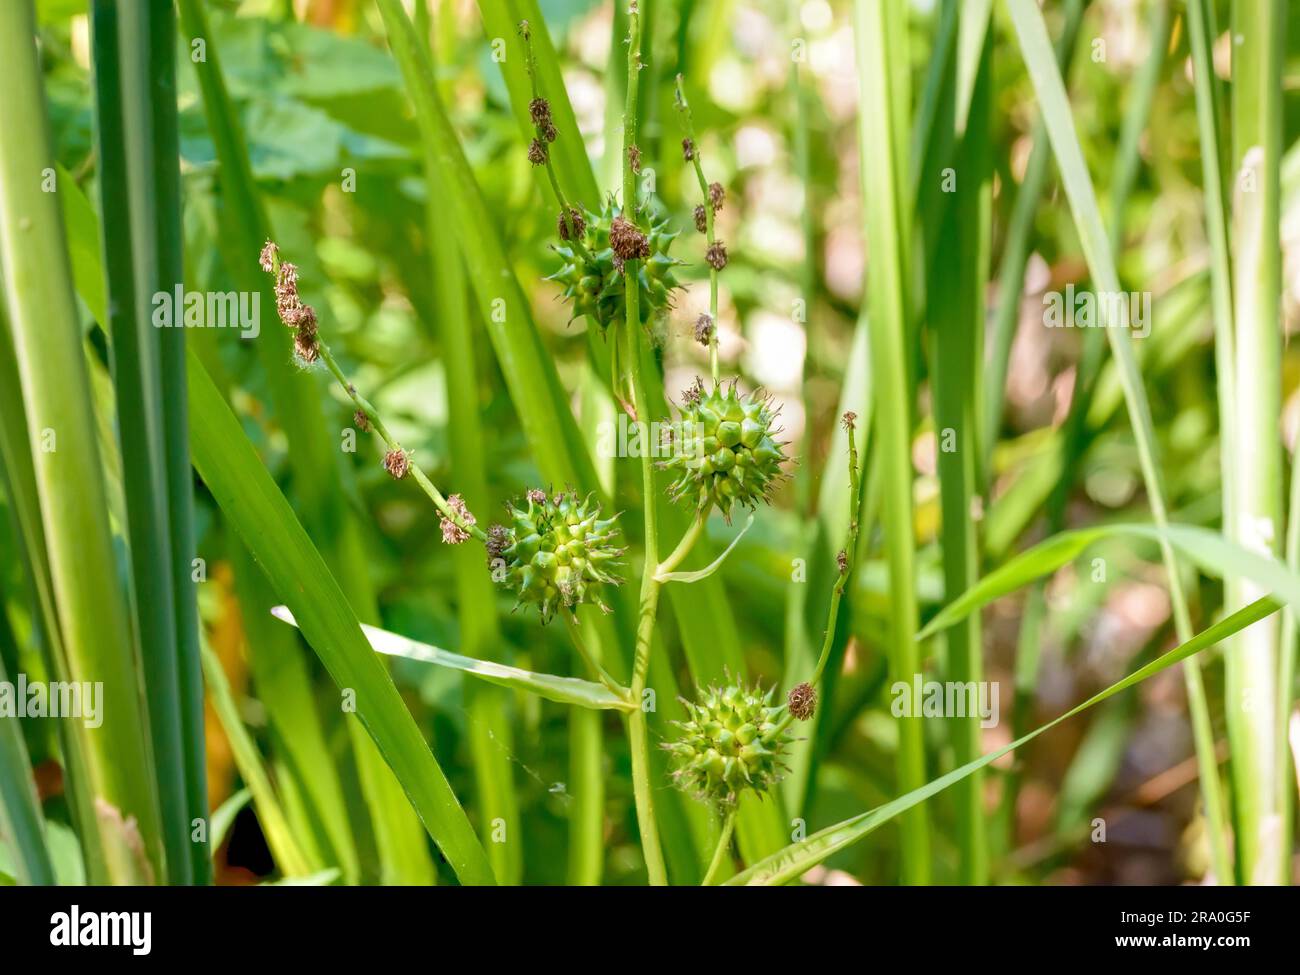 Detail of a (Sparganium erectum) growing in the middle of Typha Latifolia reeds in the lake under the summer sun Stock Photo